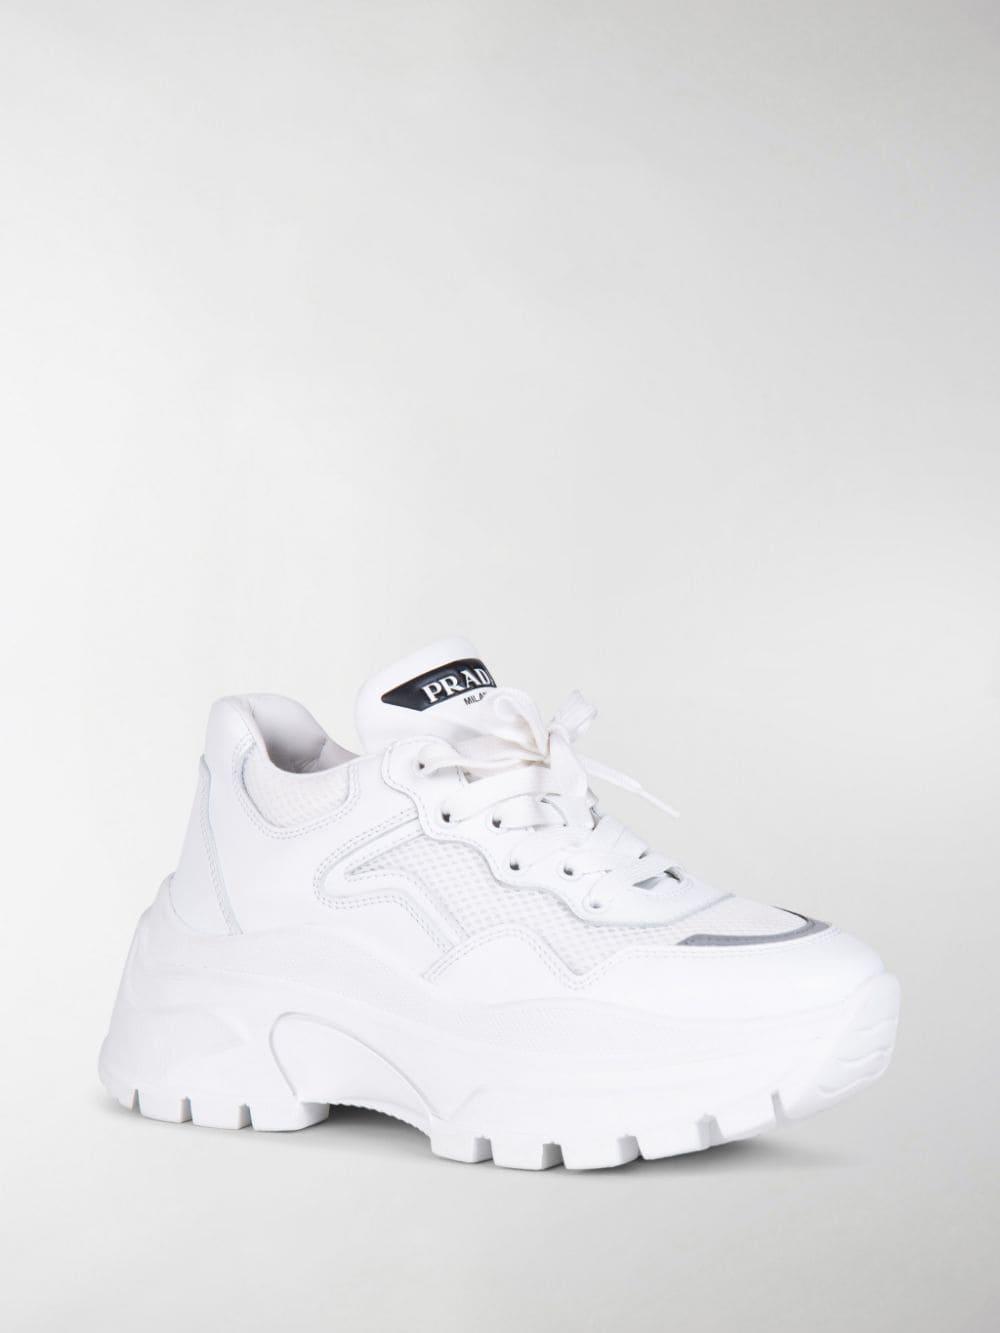 Prada Chunky Lace-up Sneakers in White - Lyst